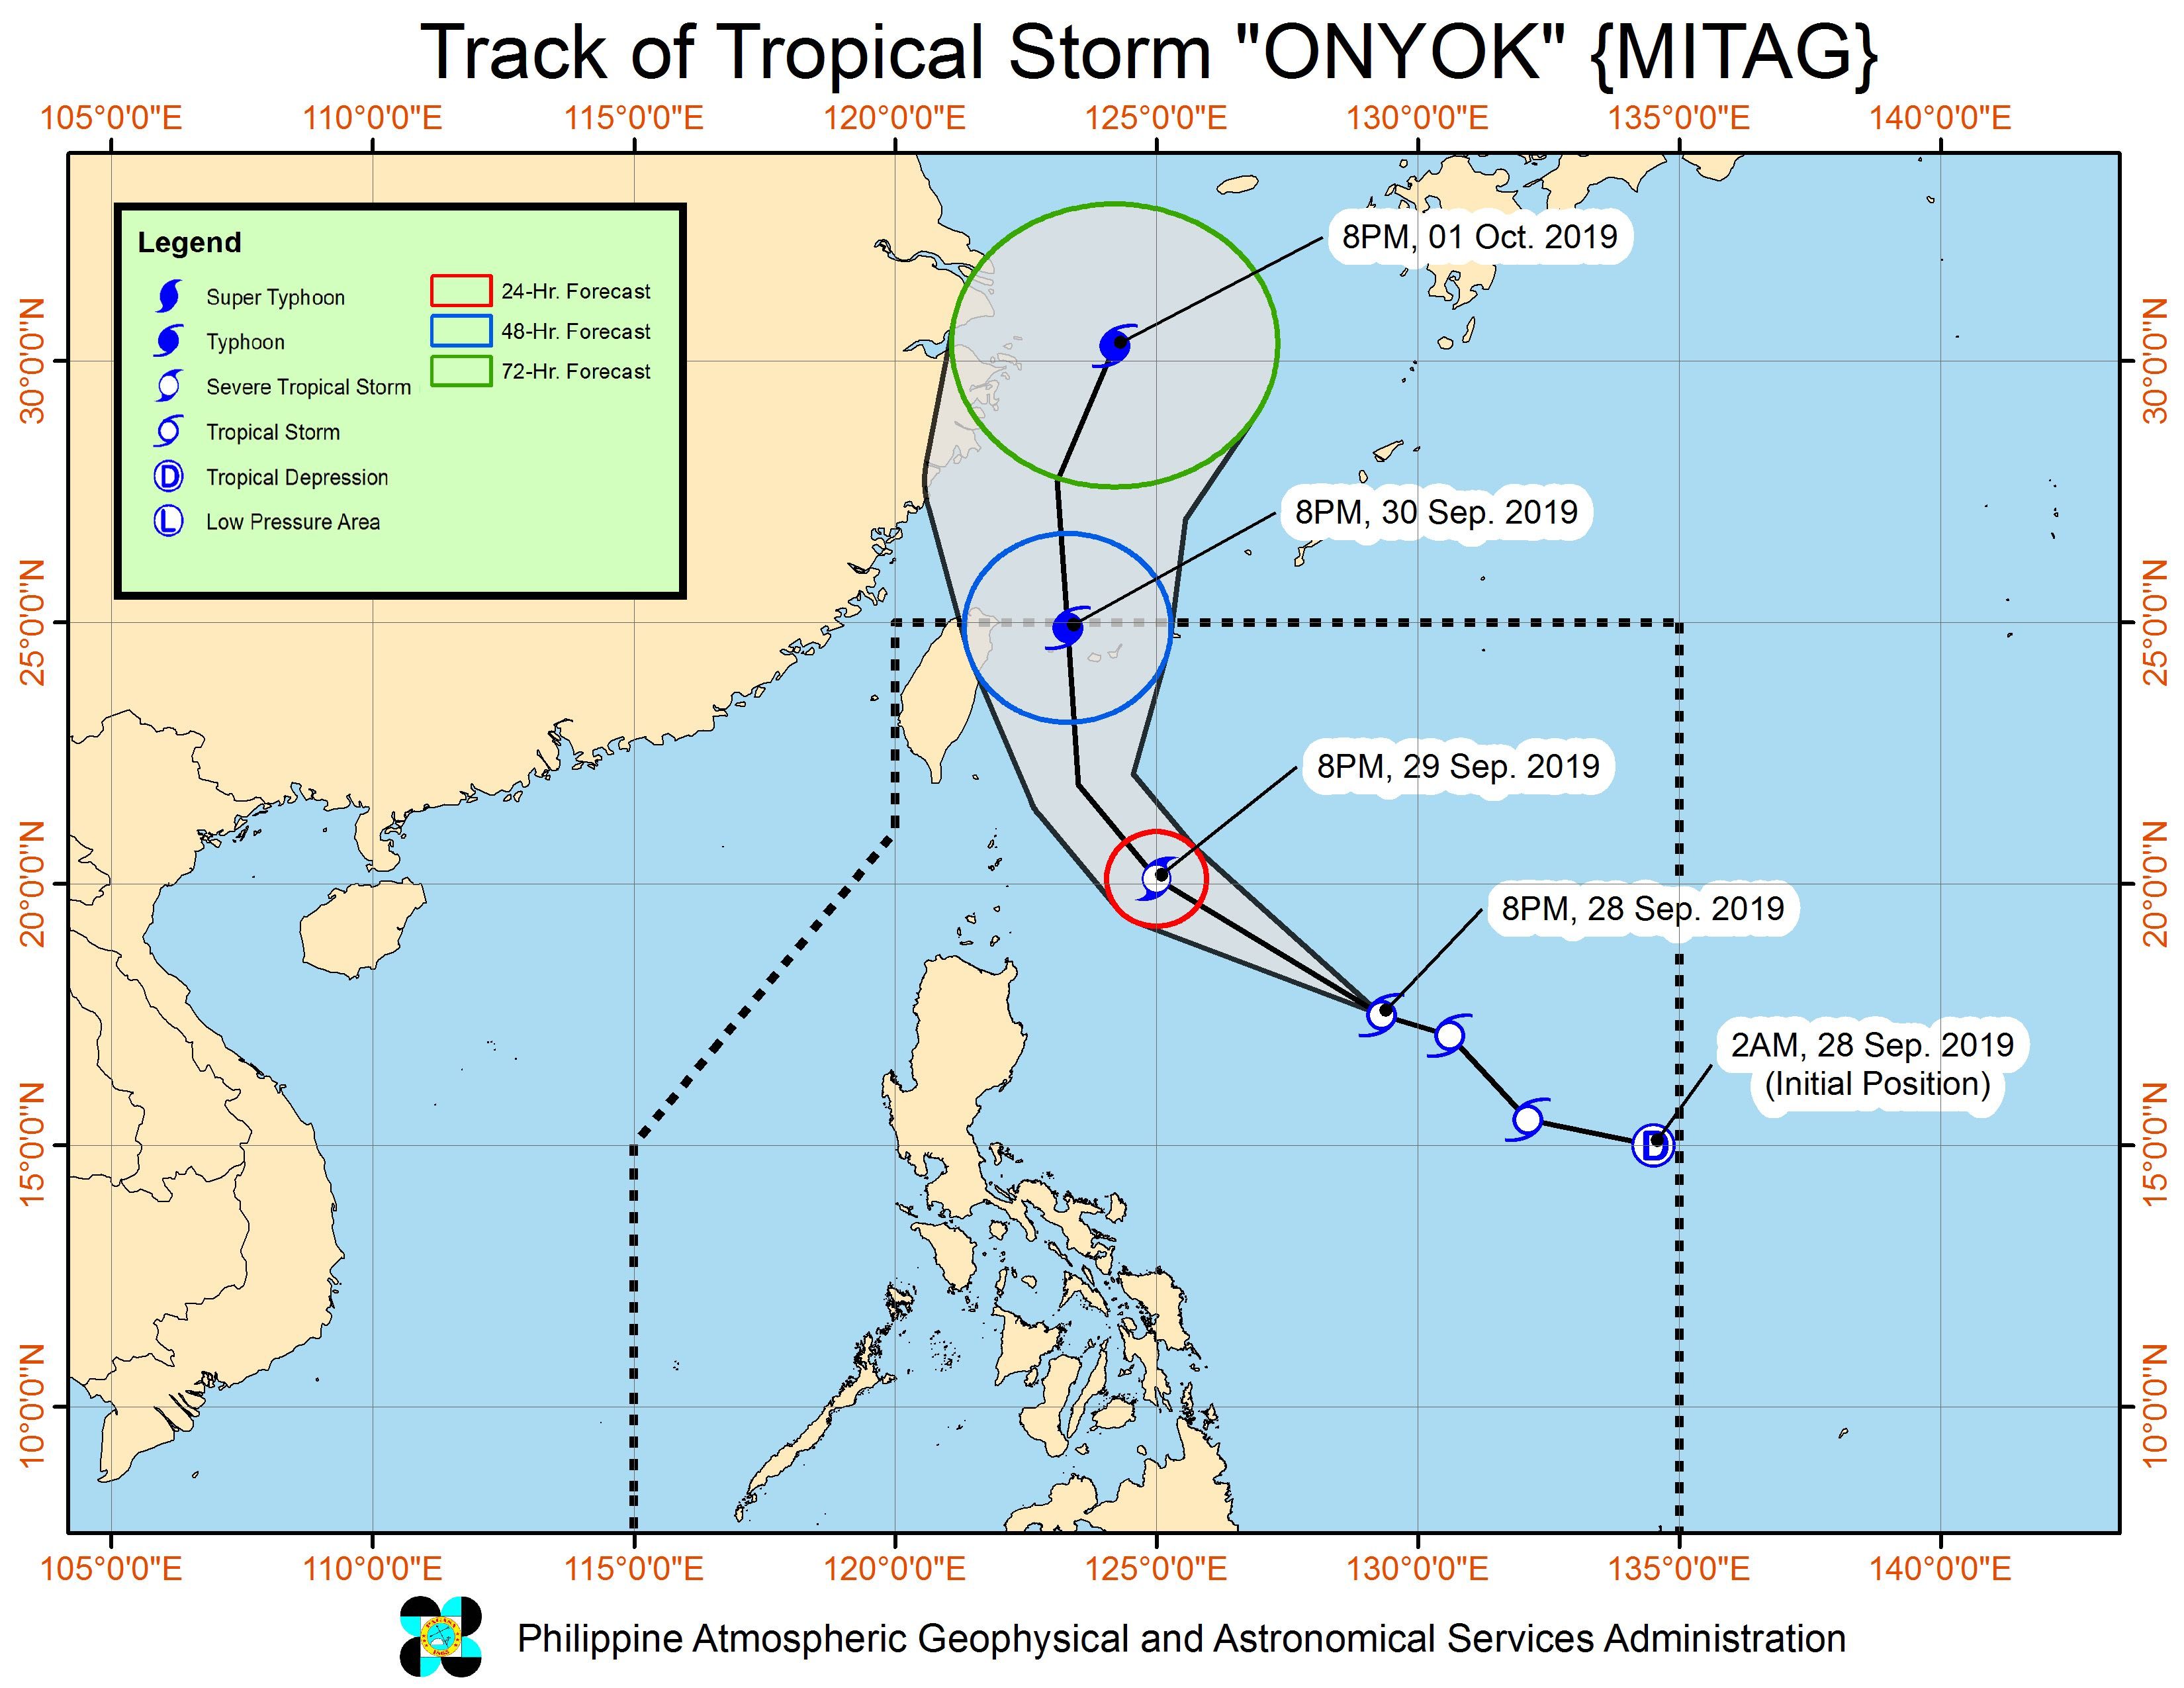 Forecast track of Tropical Storm Onyok (Mitag) as of September 28, 2019, 11 pm. Image from PAGASA 